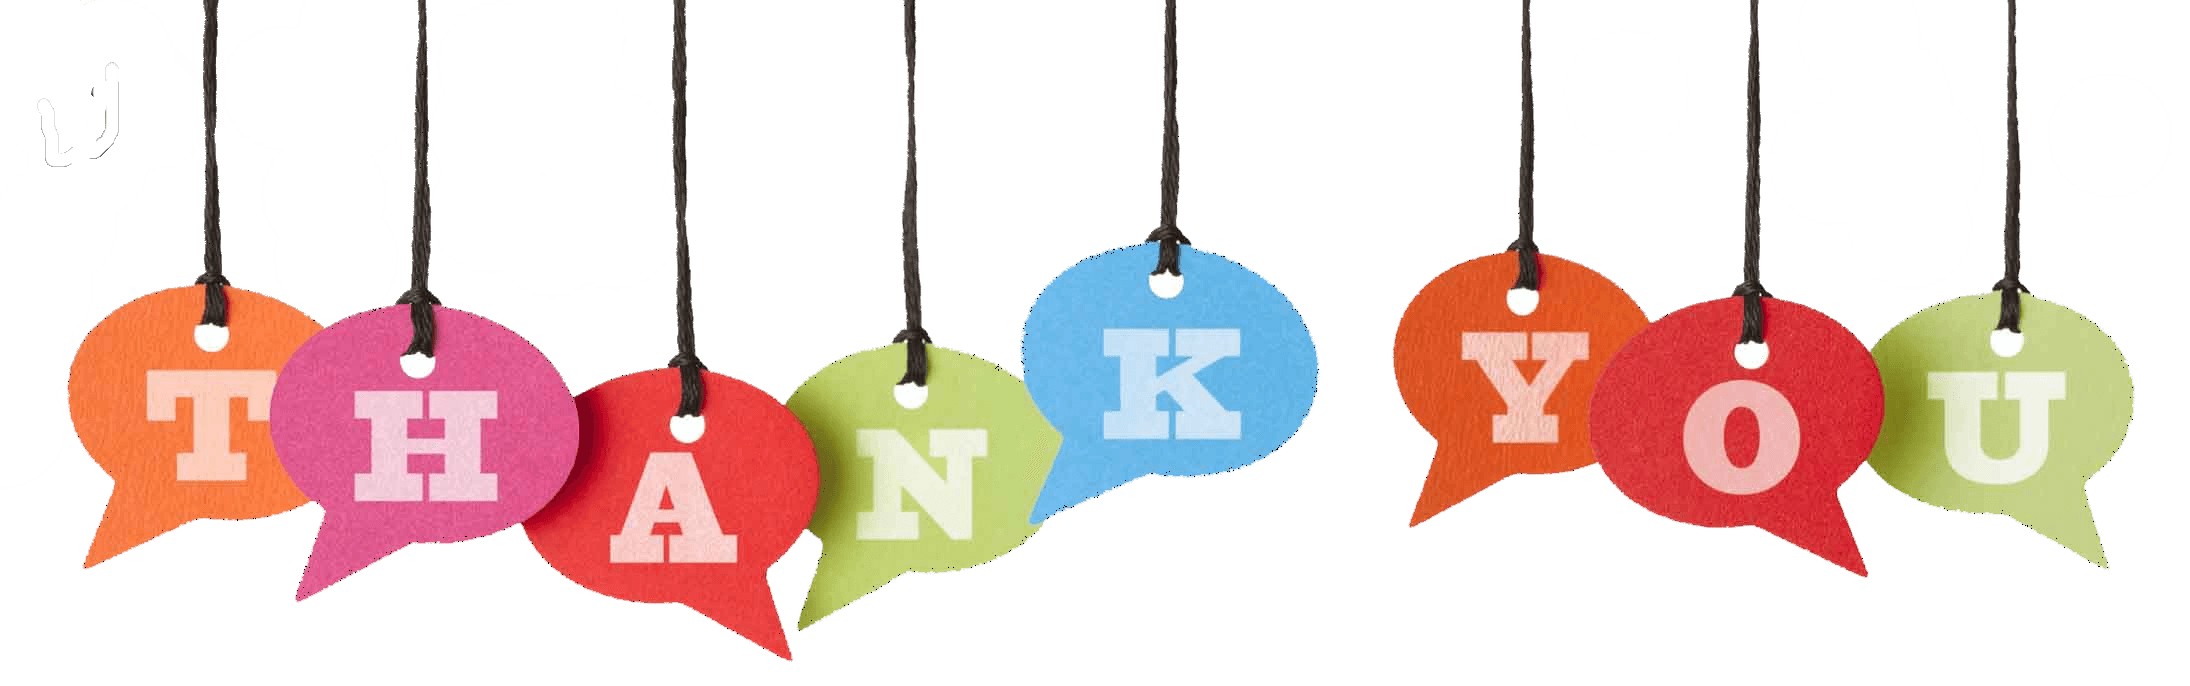 Thank You Chat Banner PNG images